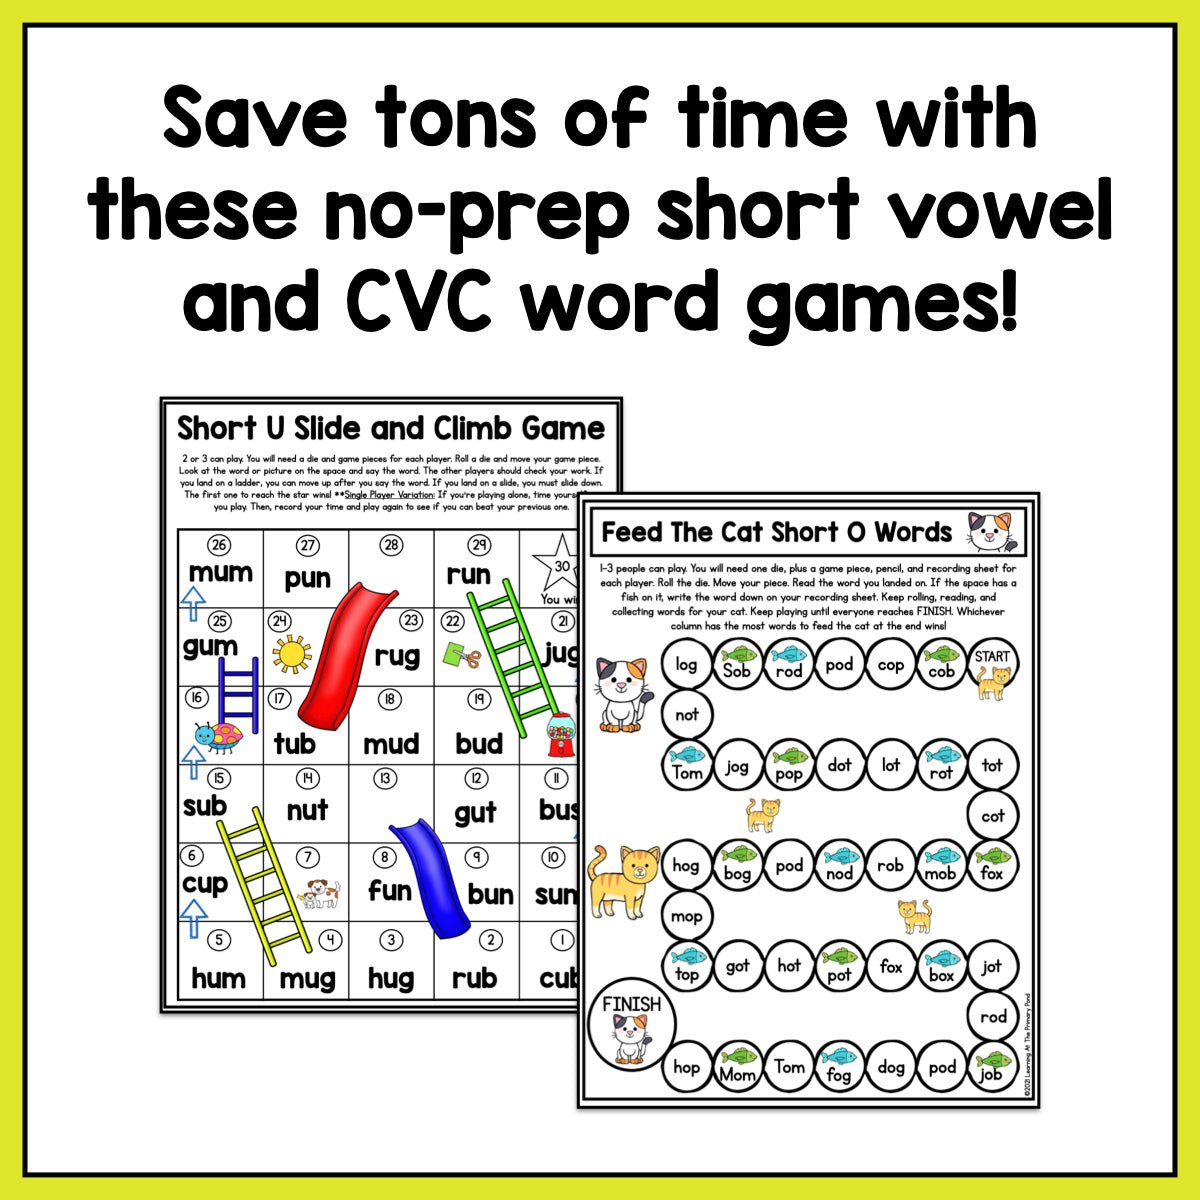 CVC Word Games: First Grade No-Prep Phonics - learning-at-the-primary-pond